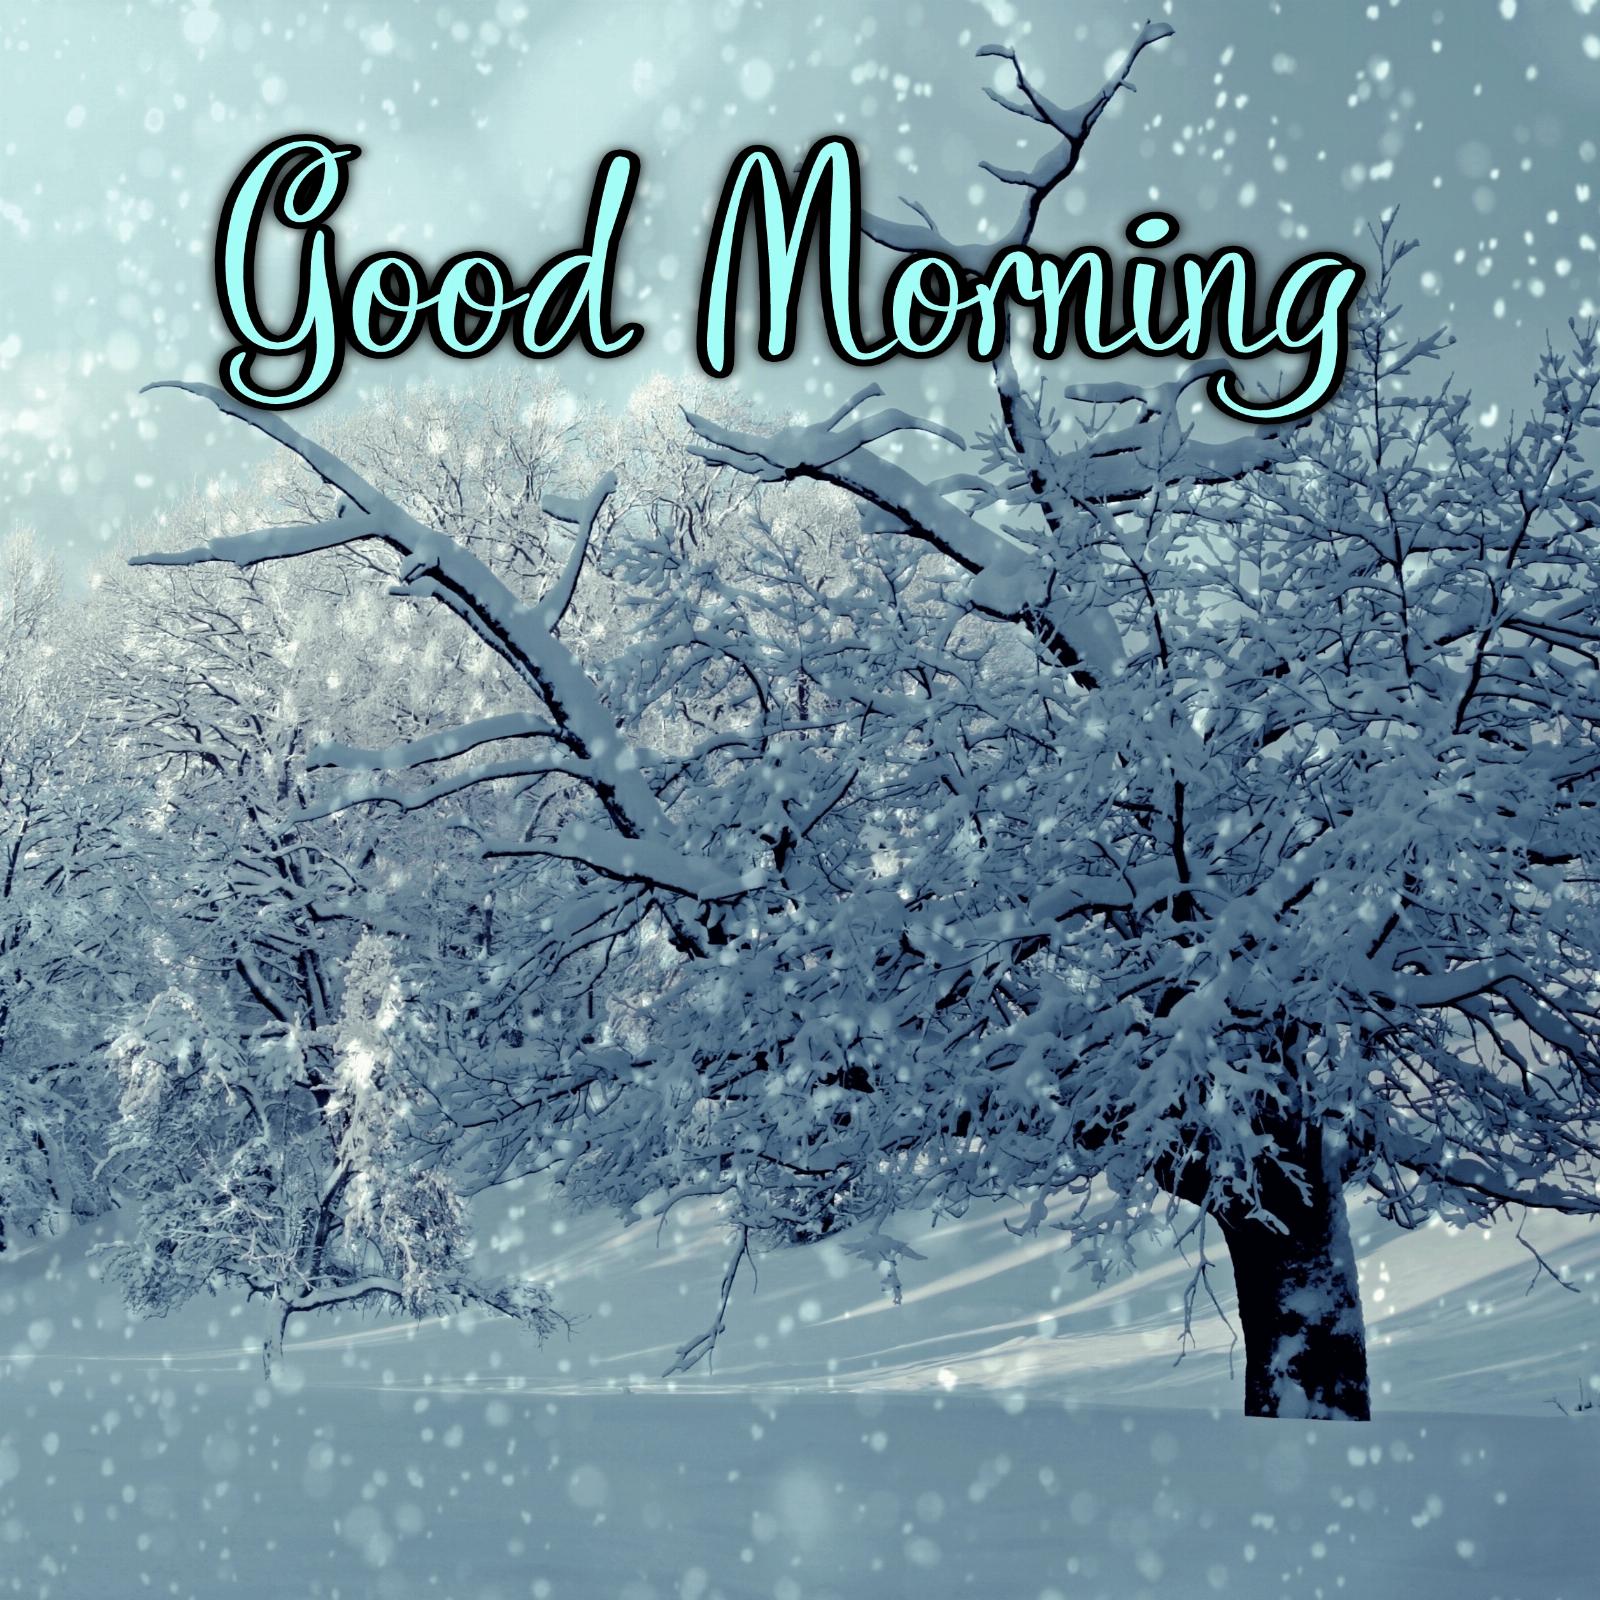 Good Morning Images With Snowfall